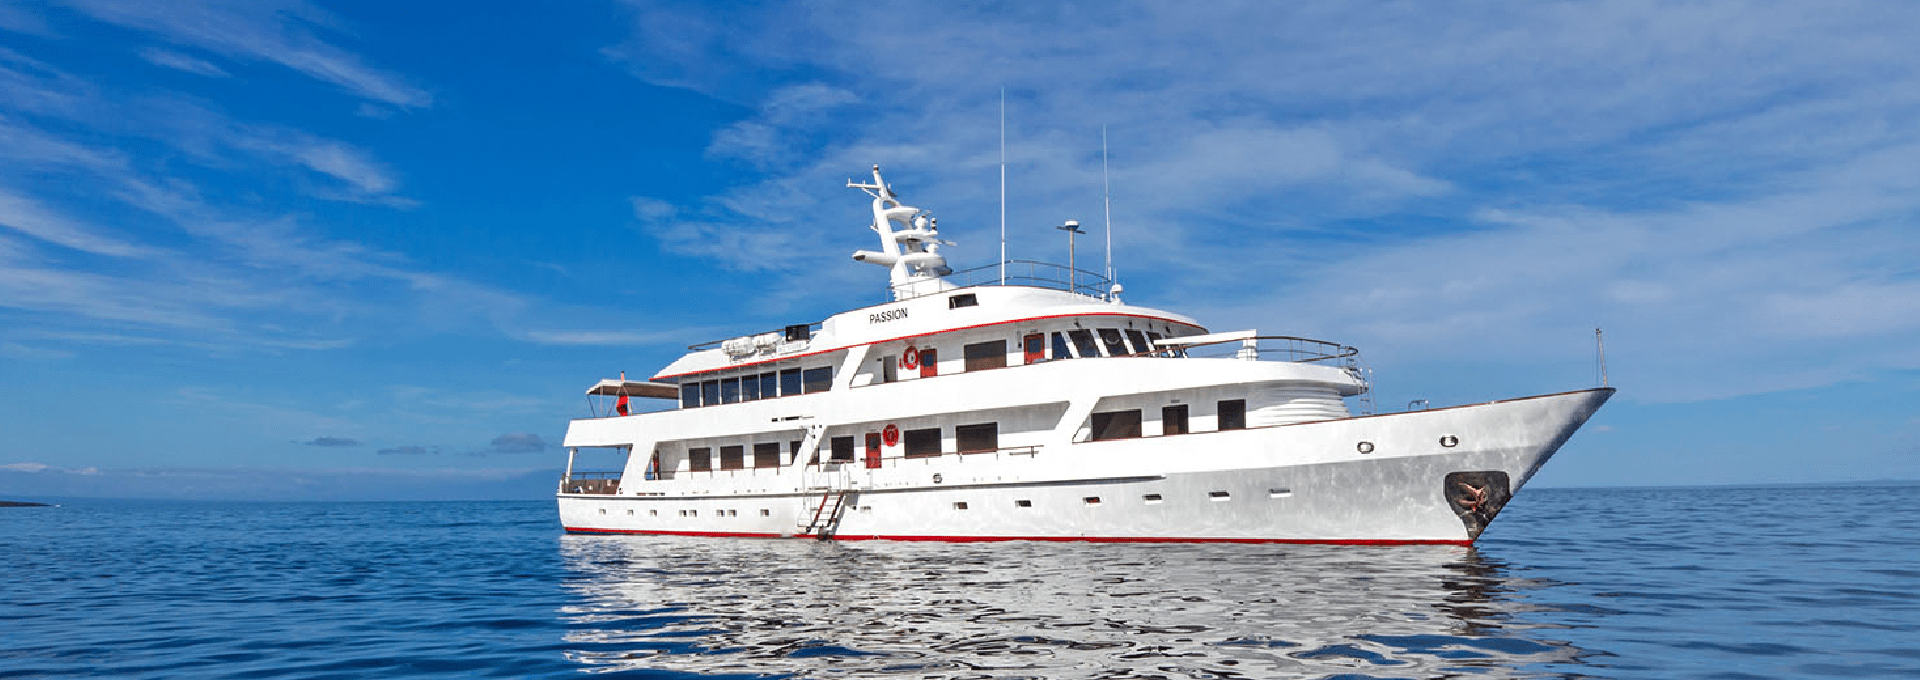 Passion luxury yacht galapagos